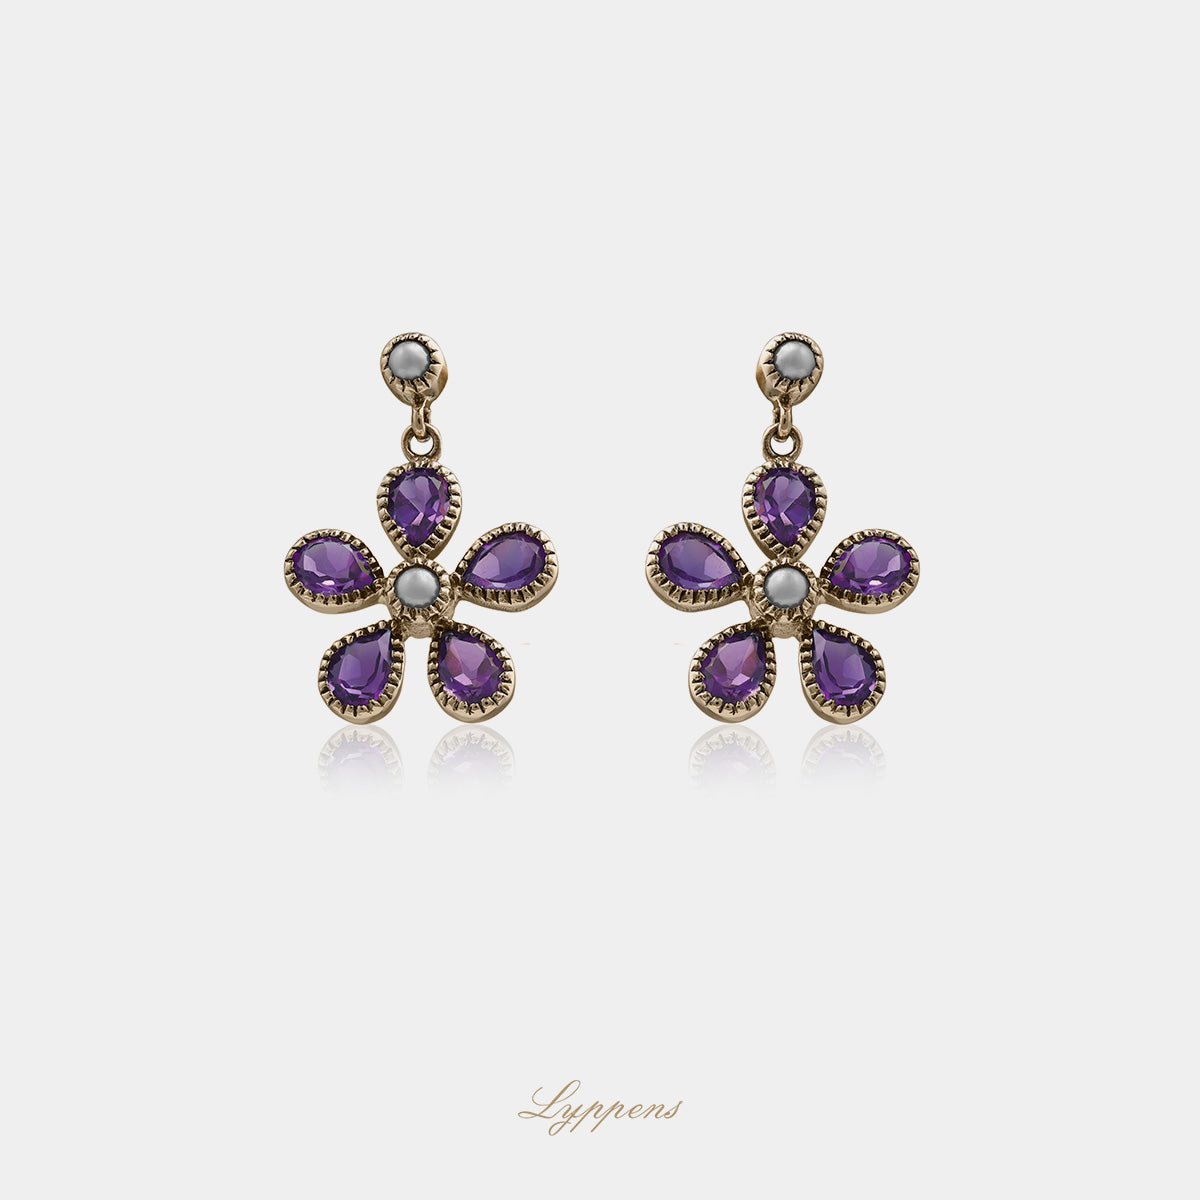 Yellow gold ear studs with amethyst and pearls